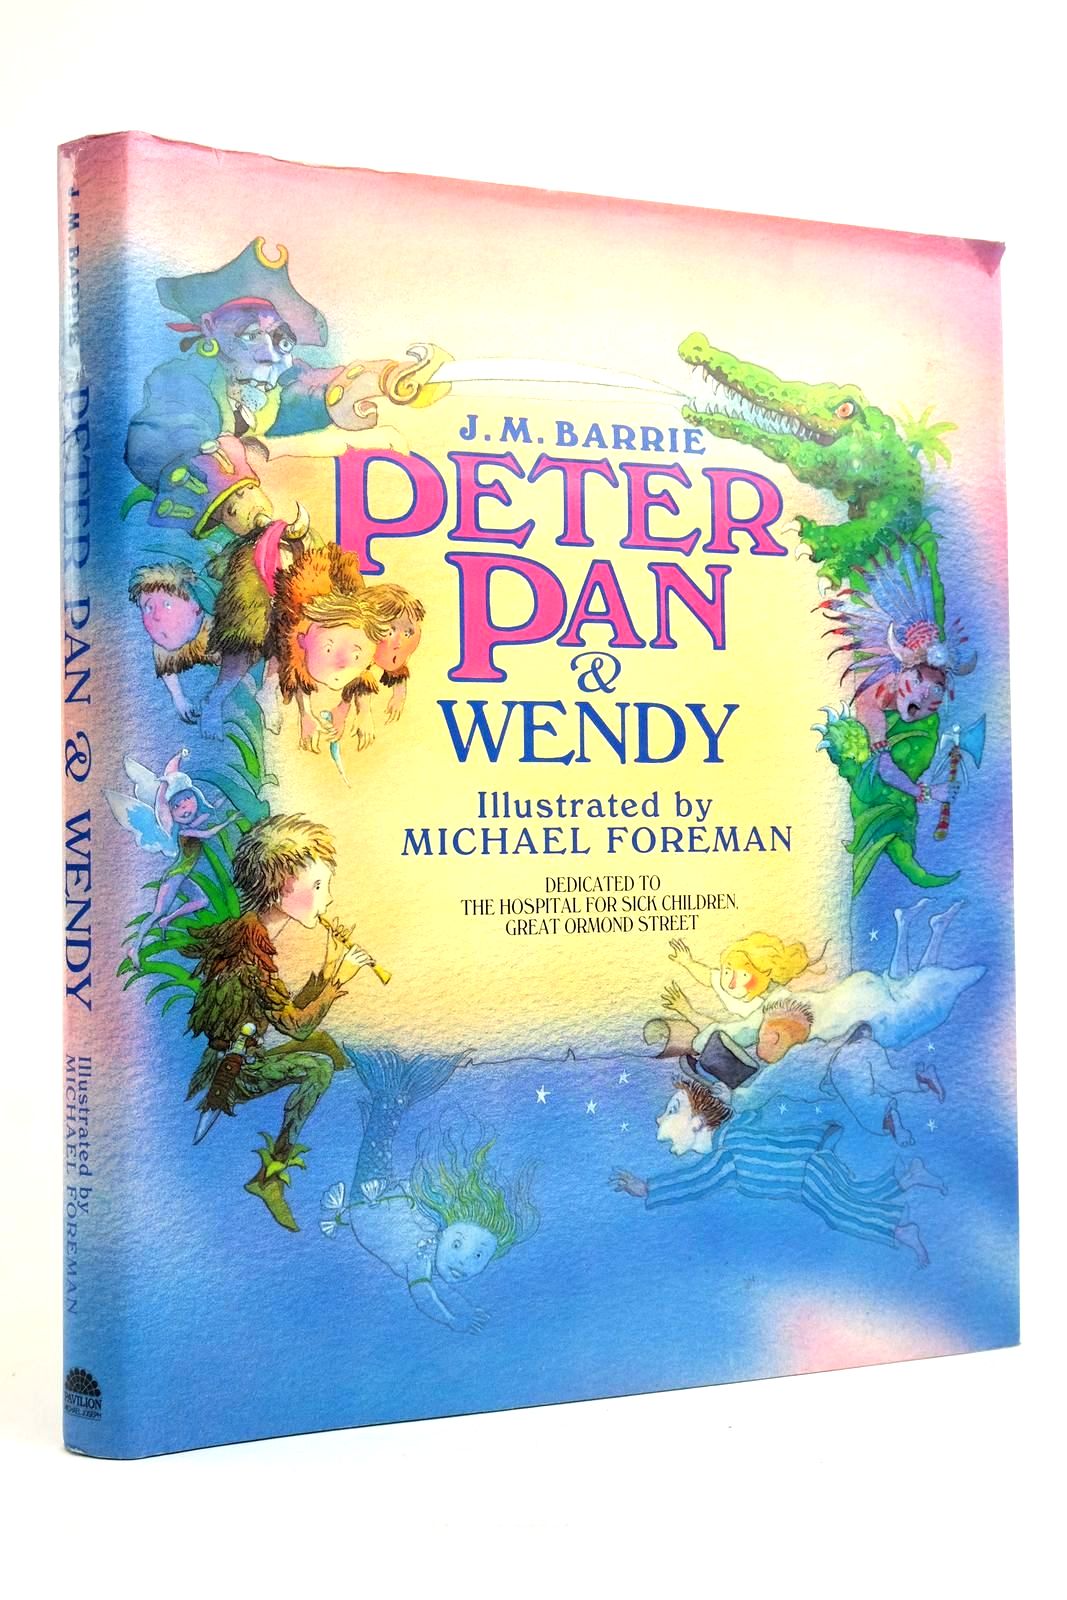 Photo of PETER PAN & WENDY written by Barrie, J.M. illustrated by Foreman, Michael published by Pavilion Books (STOCK CODE: 2135472)  for sale by Stella & Rose's Books